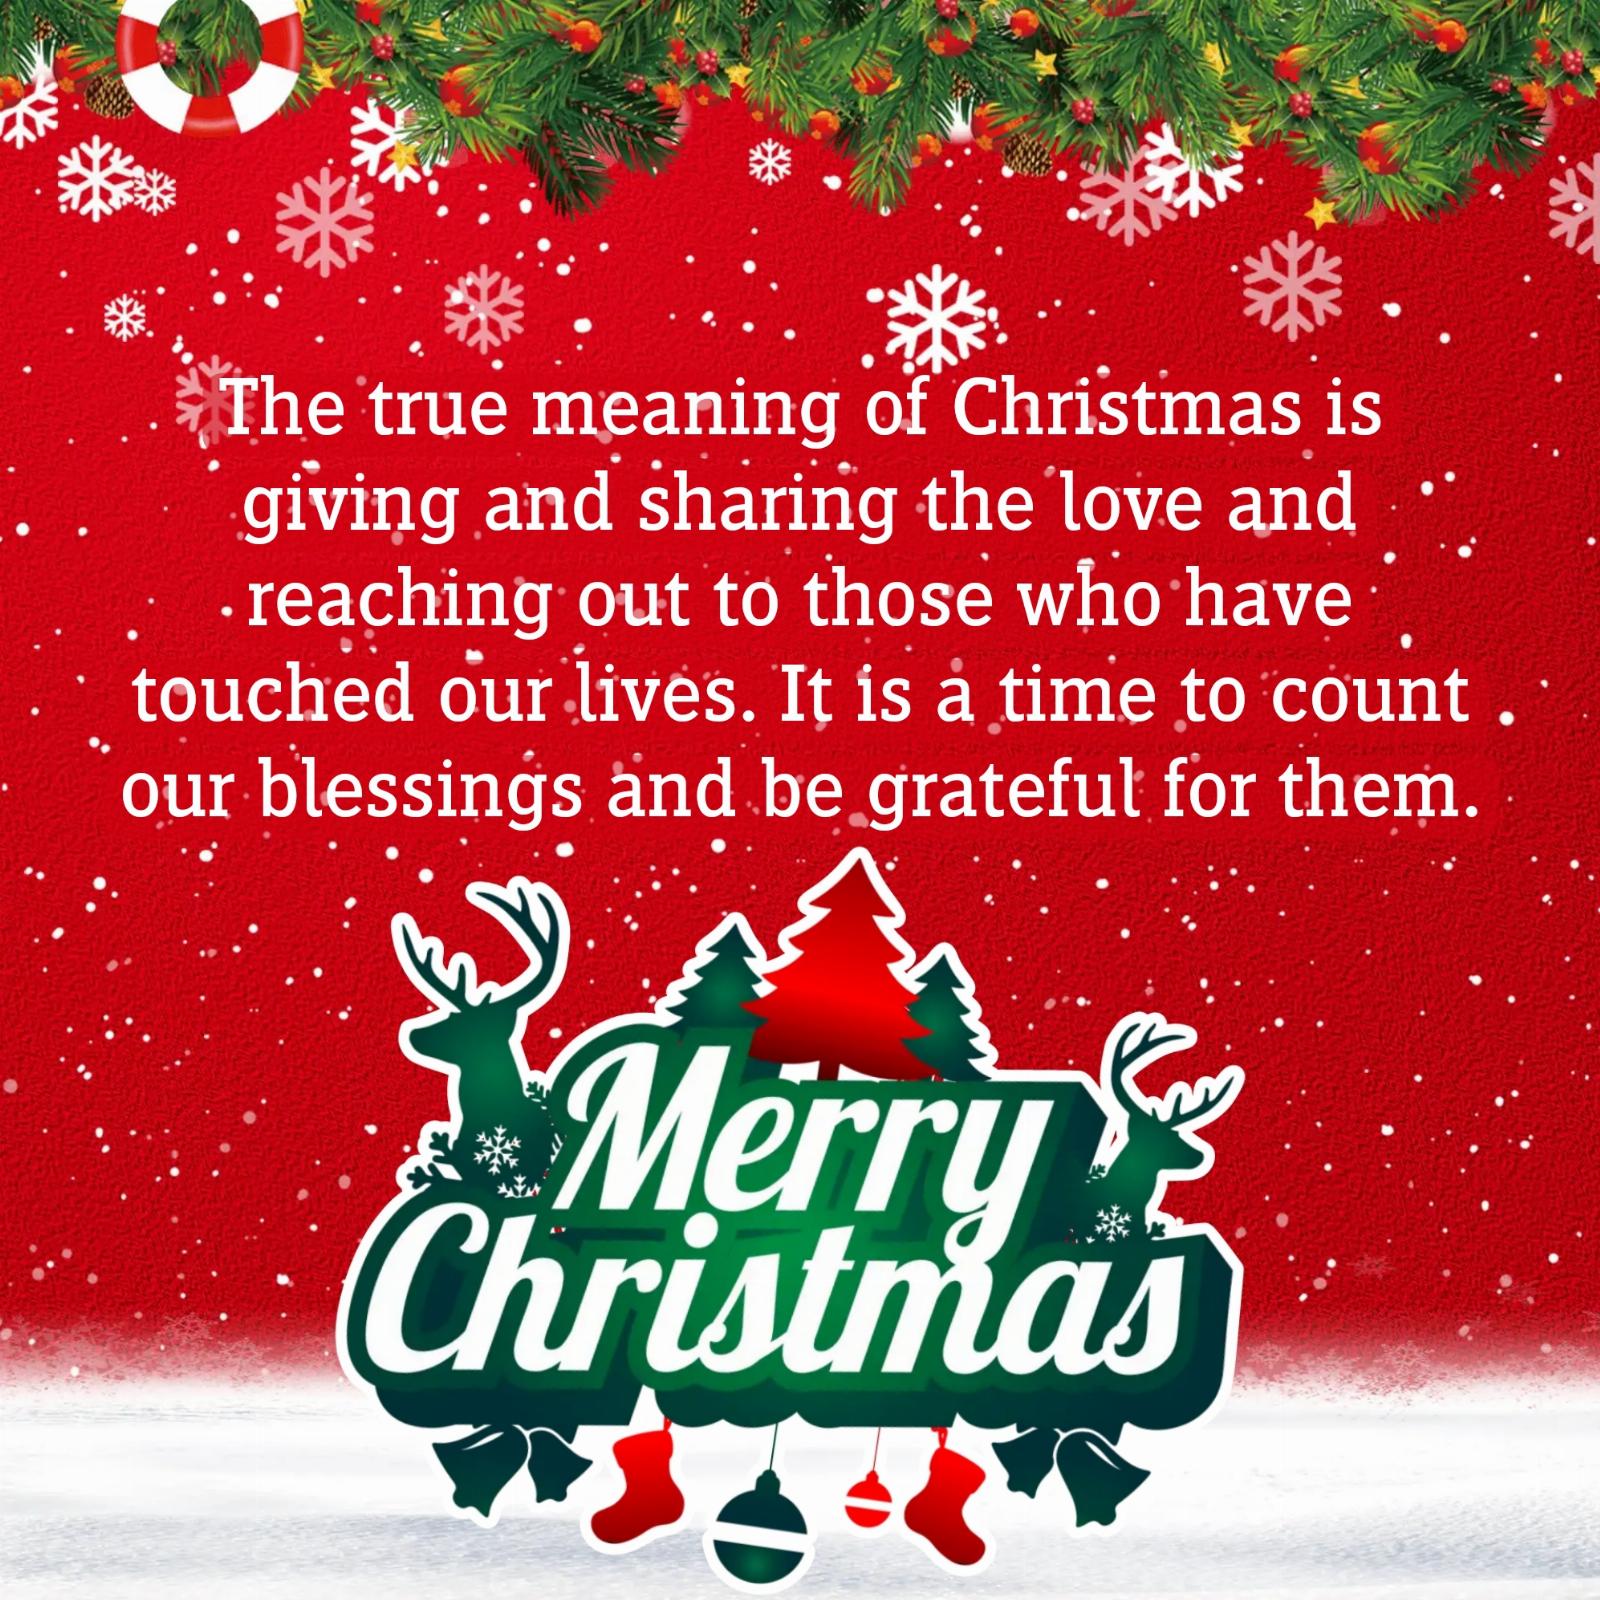 The true meaning of Christmas is giving and sharing the love